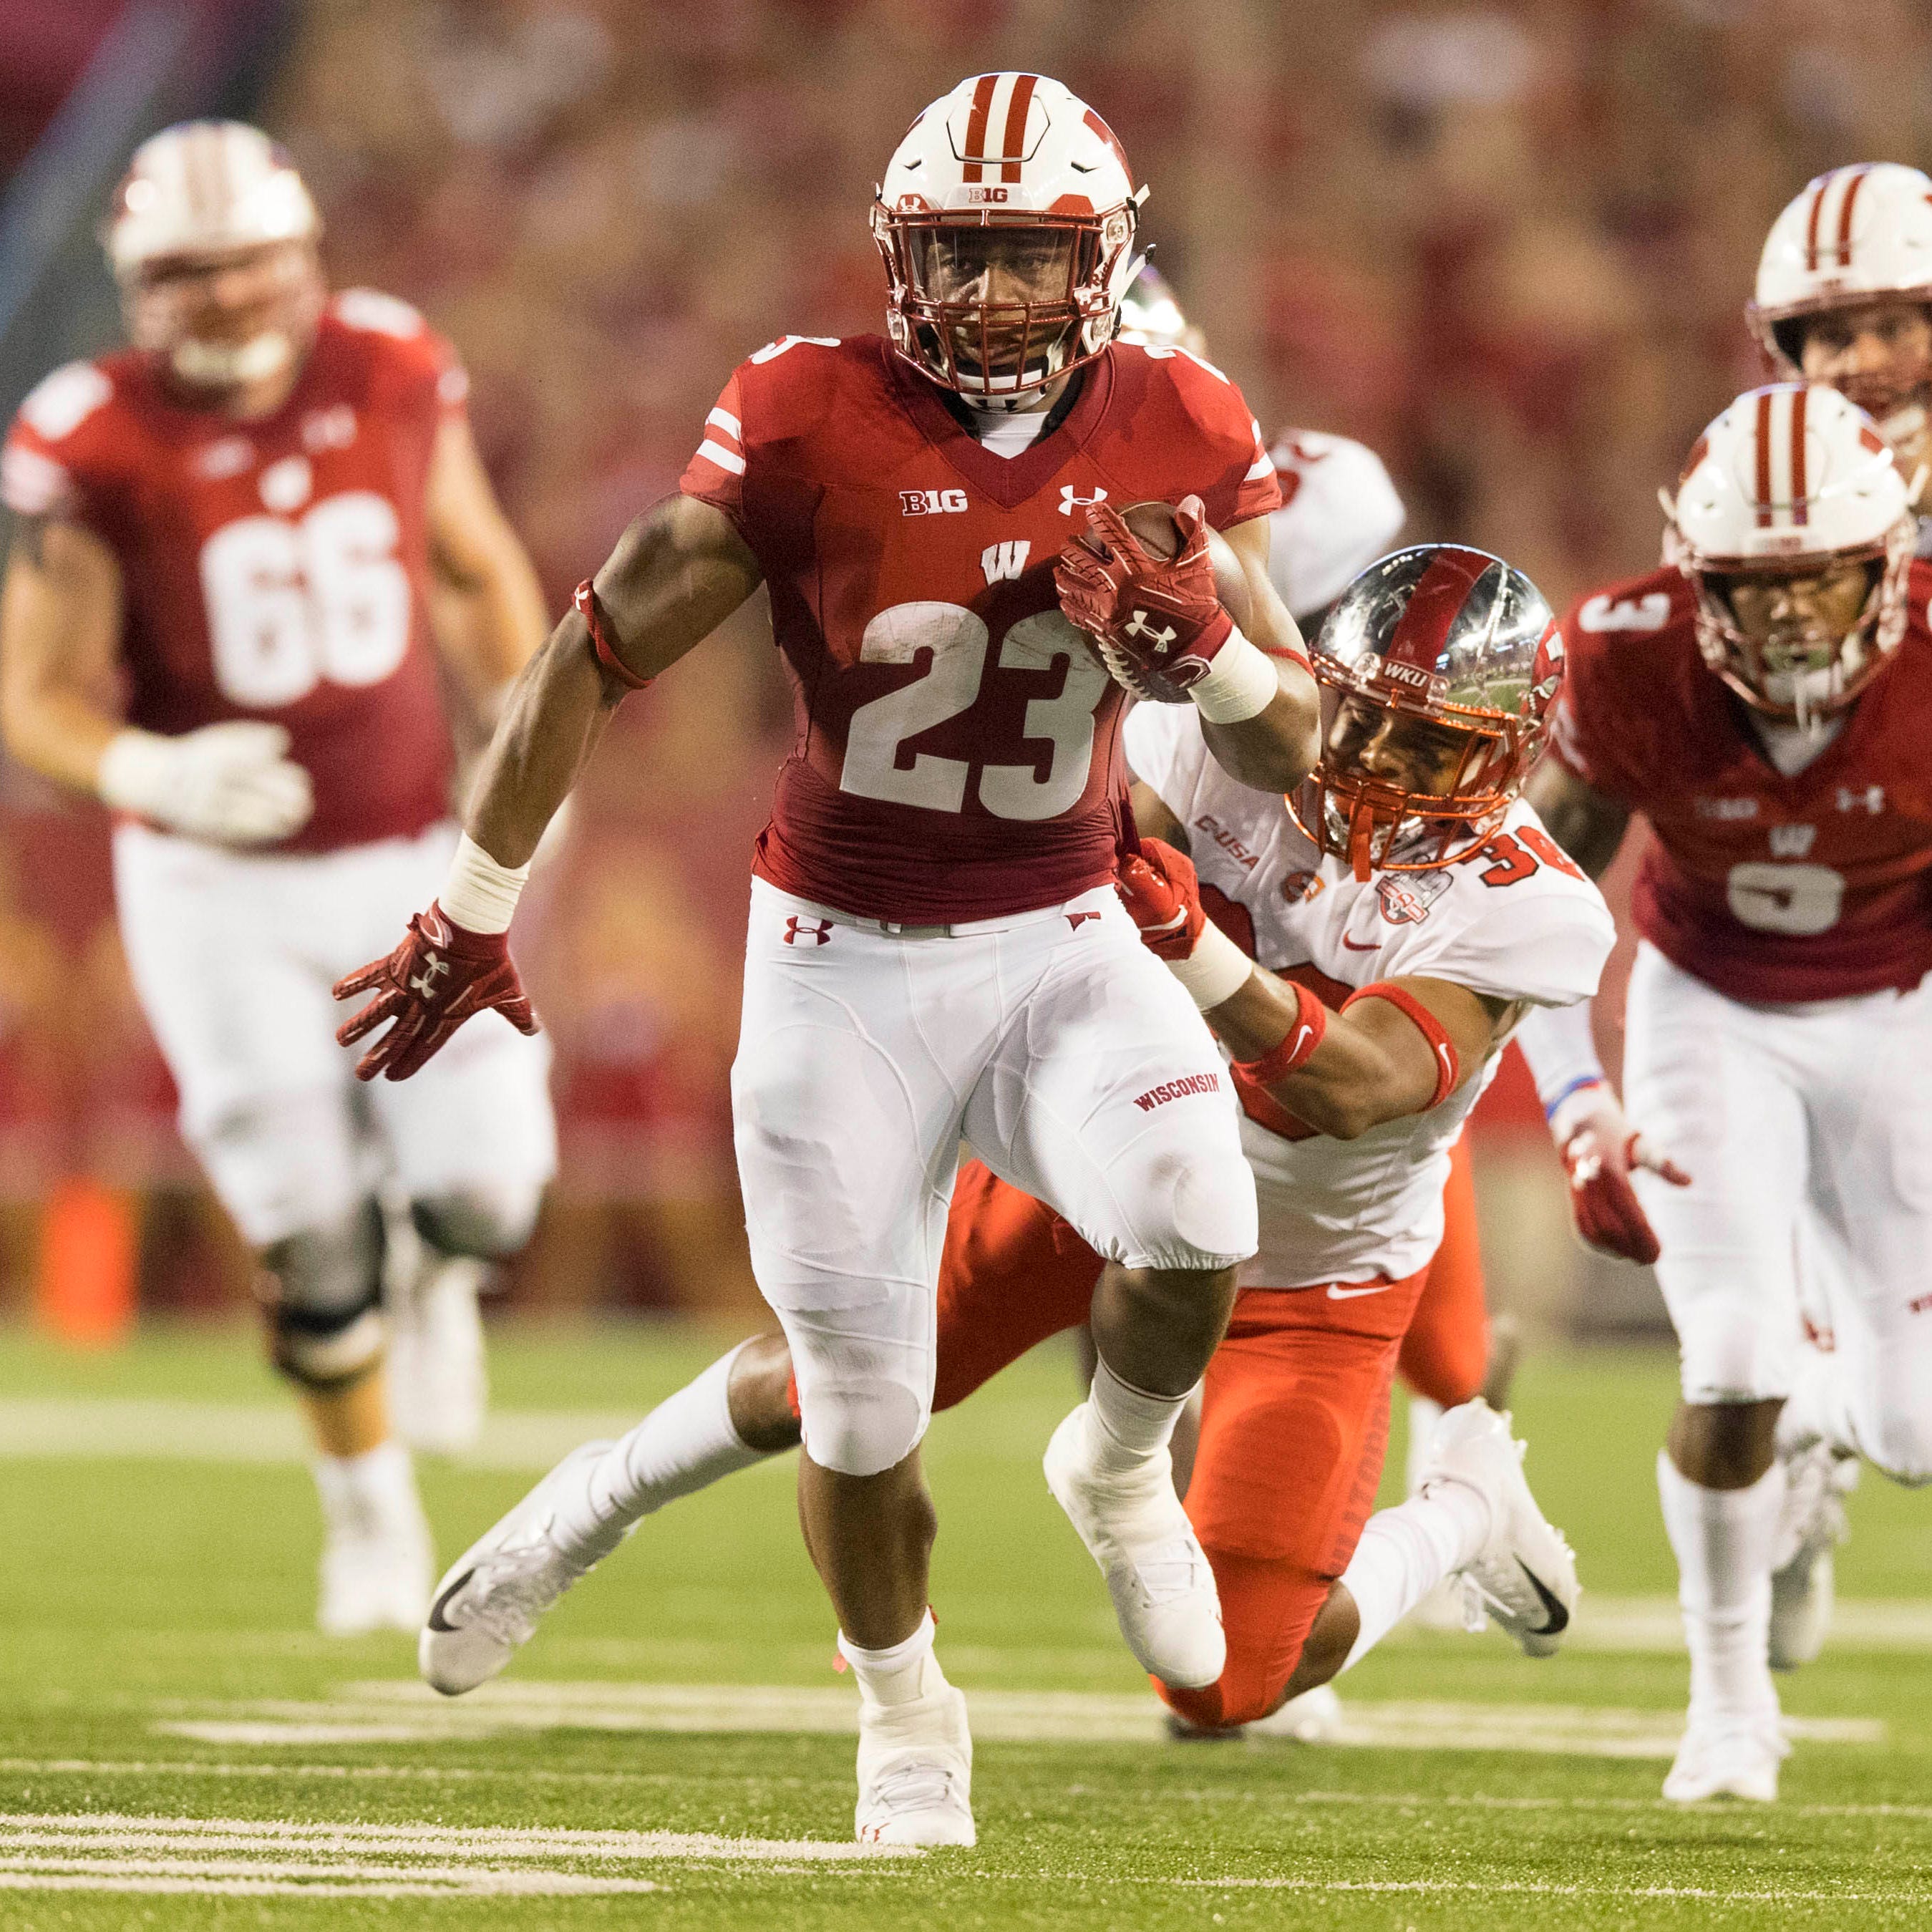 Wisconsin running back Jonathan Taylor breaks free for a touchdown against Western Kentucky in the team's opener.